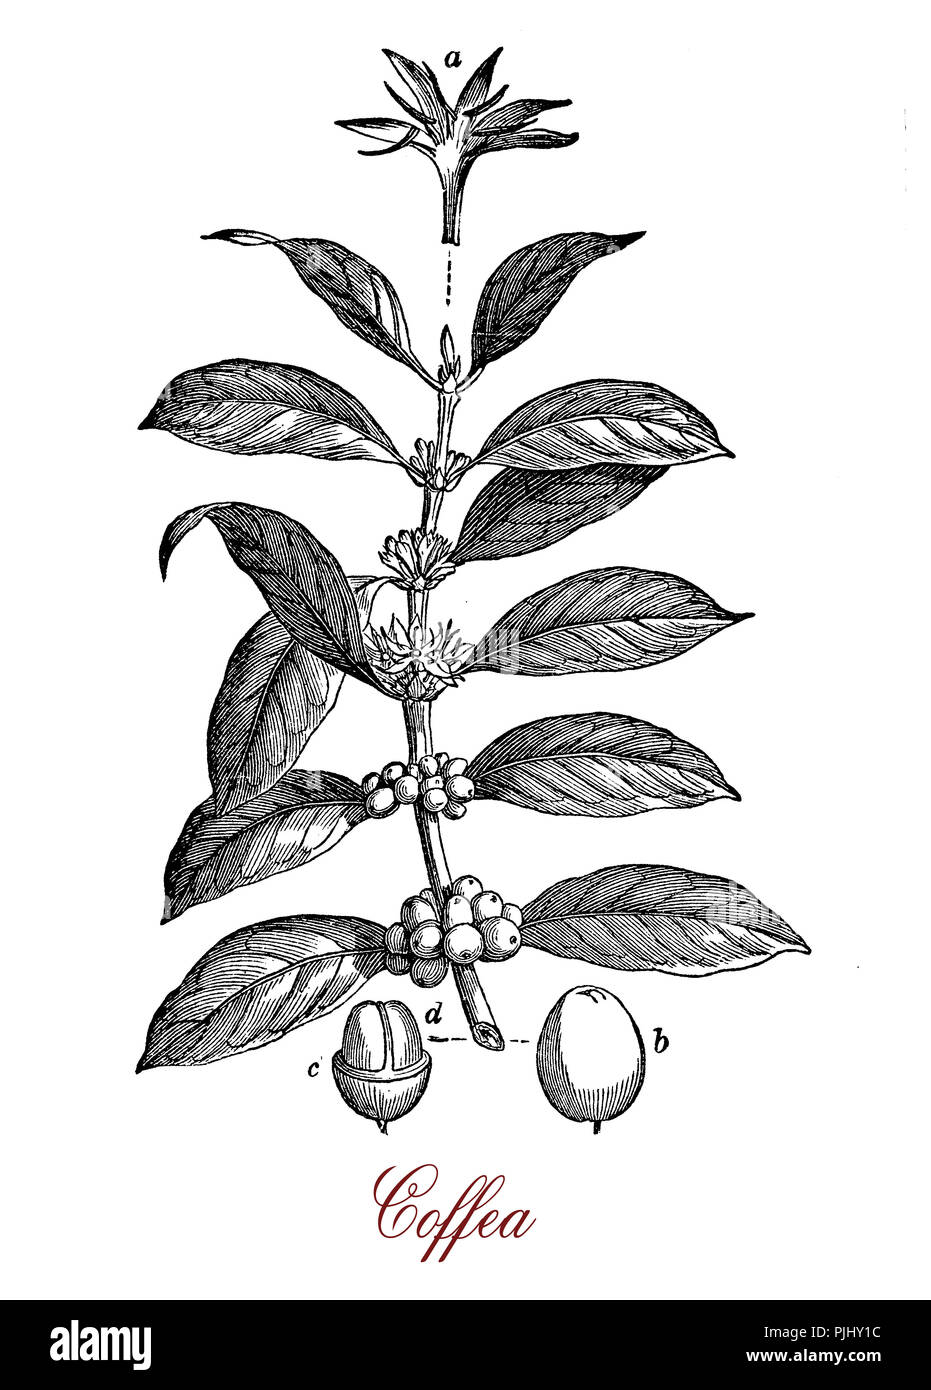 Vintage print of Coffea coffee plant botanical morphology:  leaves, flowers and berries containing 2 coffee beans each. Stock Photo